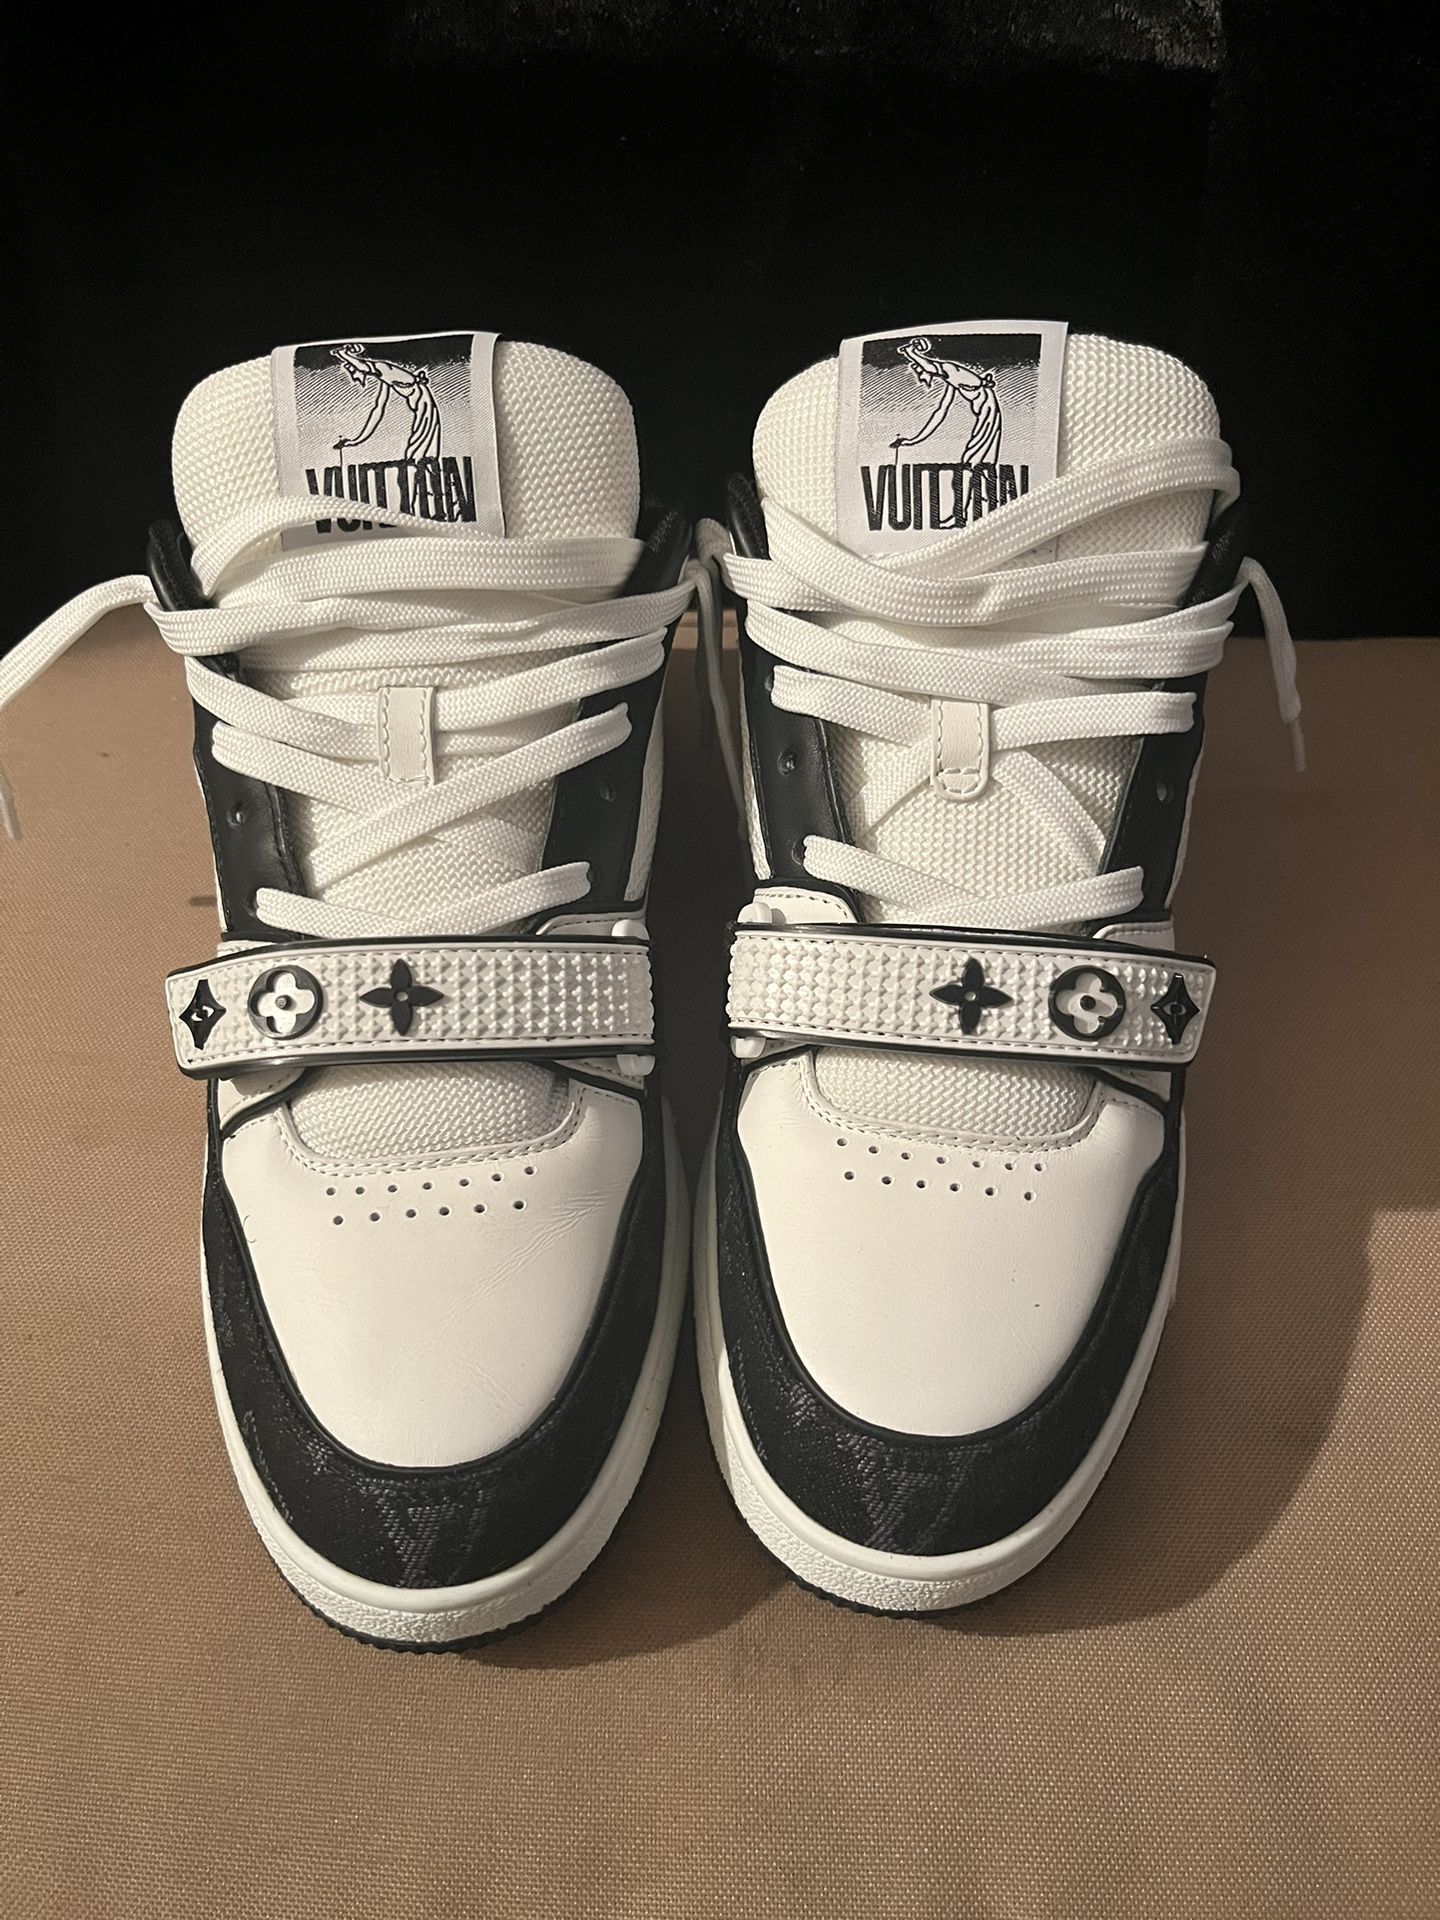 Lv sneakers no box for Sale in Brooklyn, NY - OfferUp